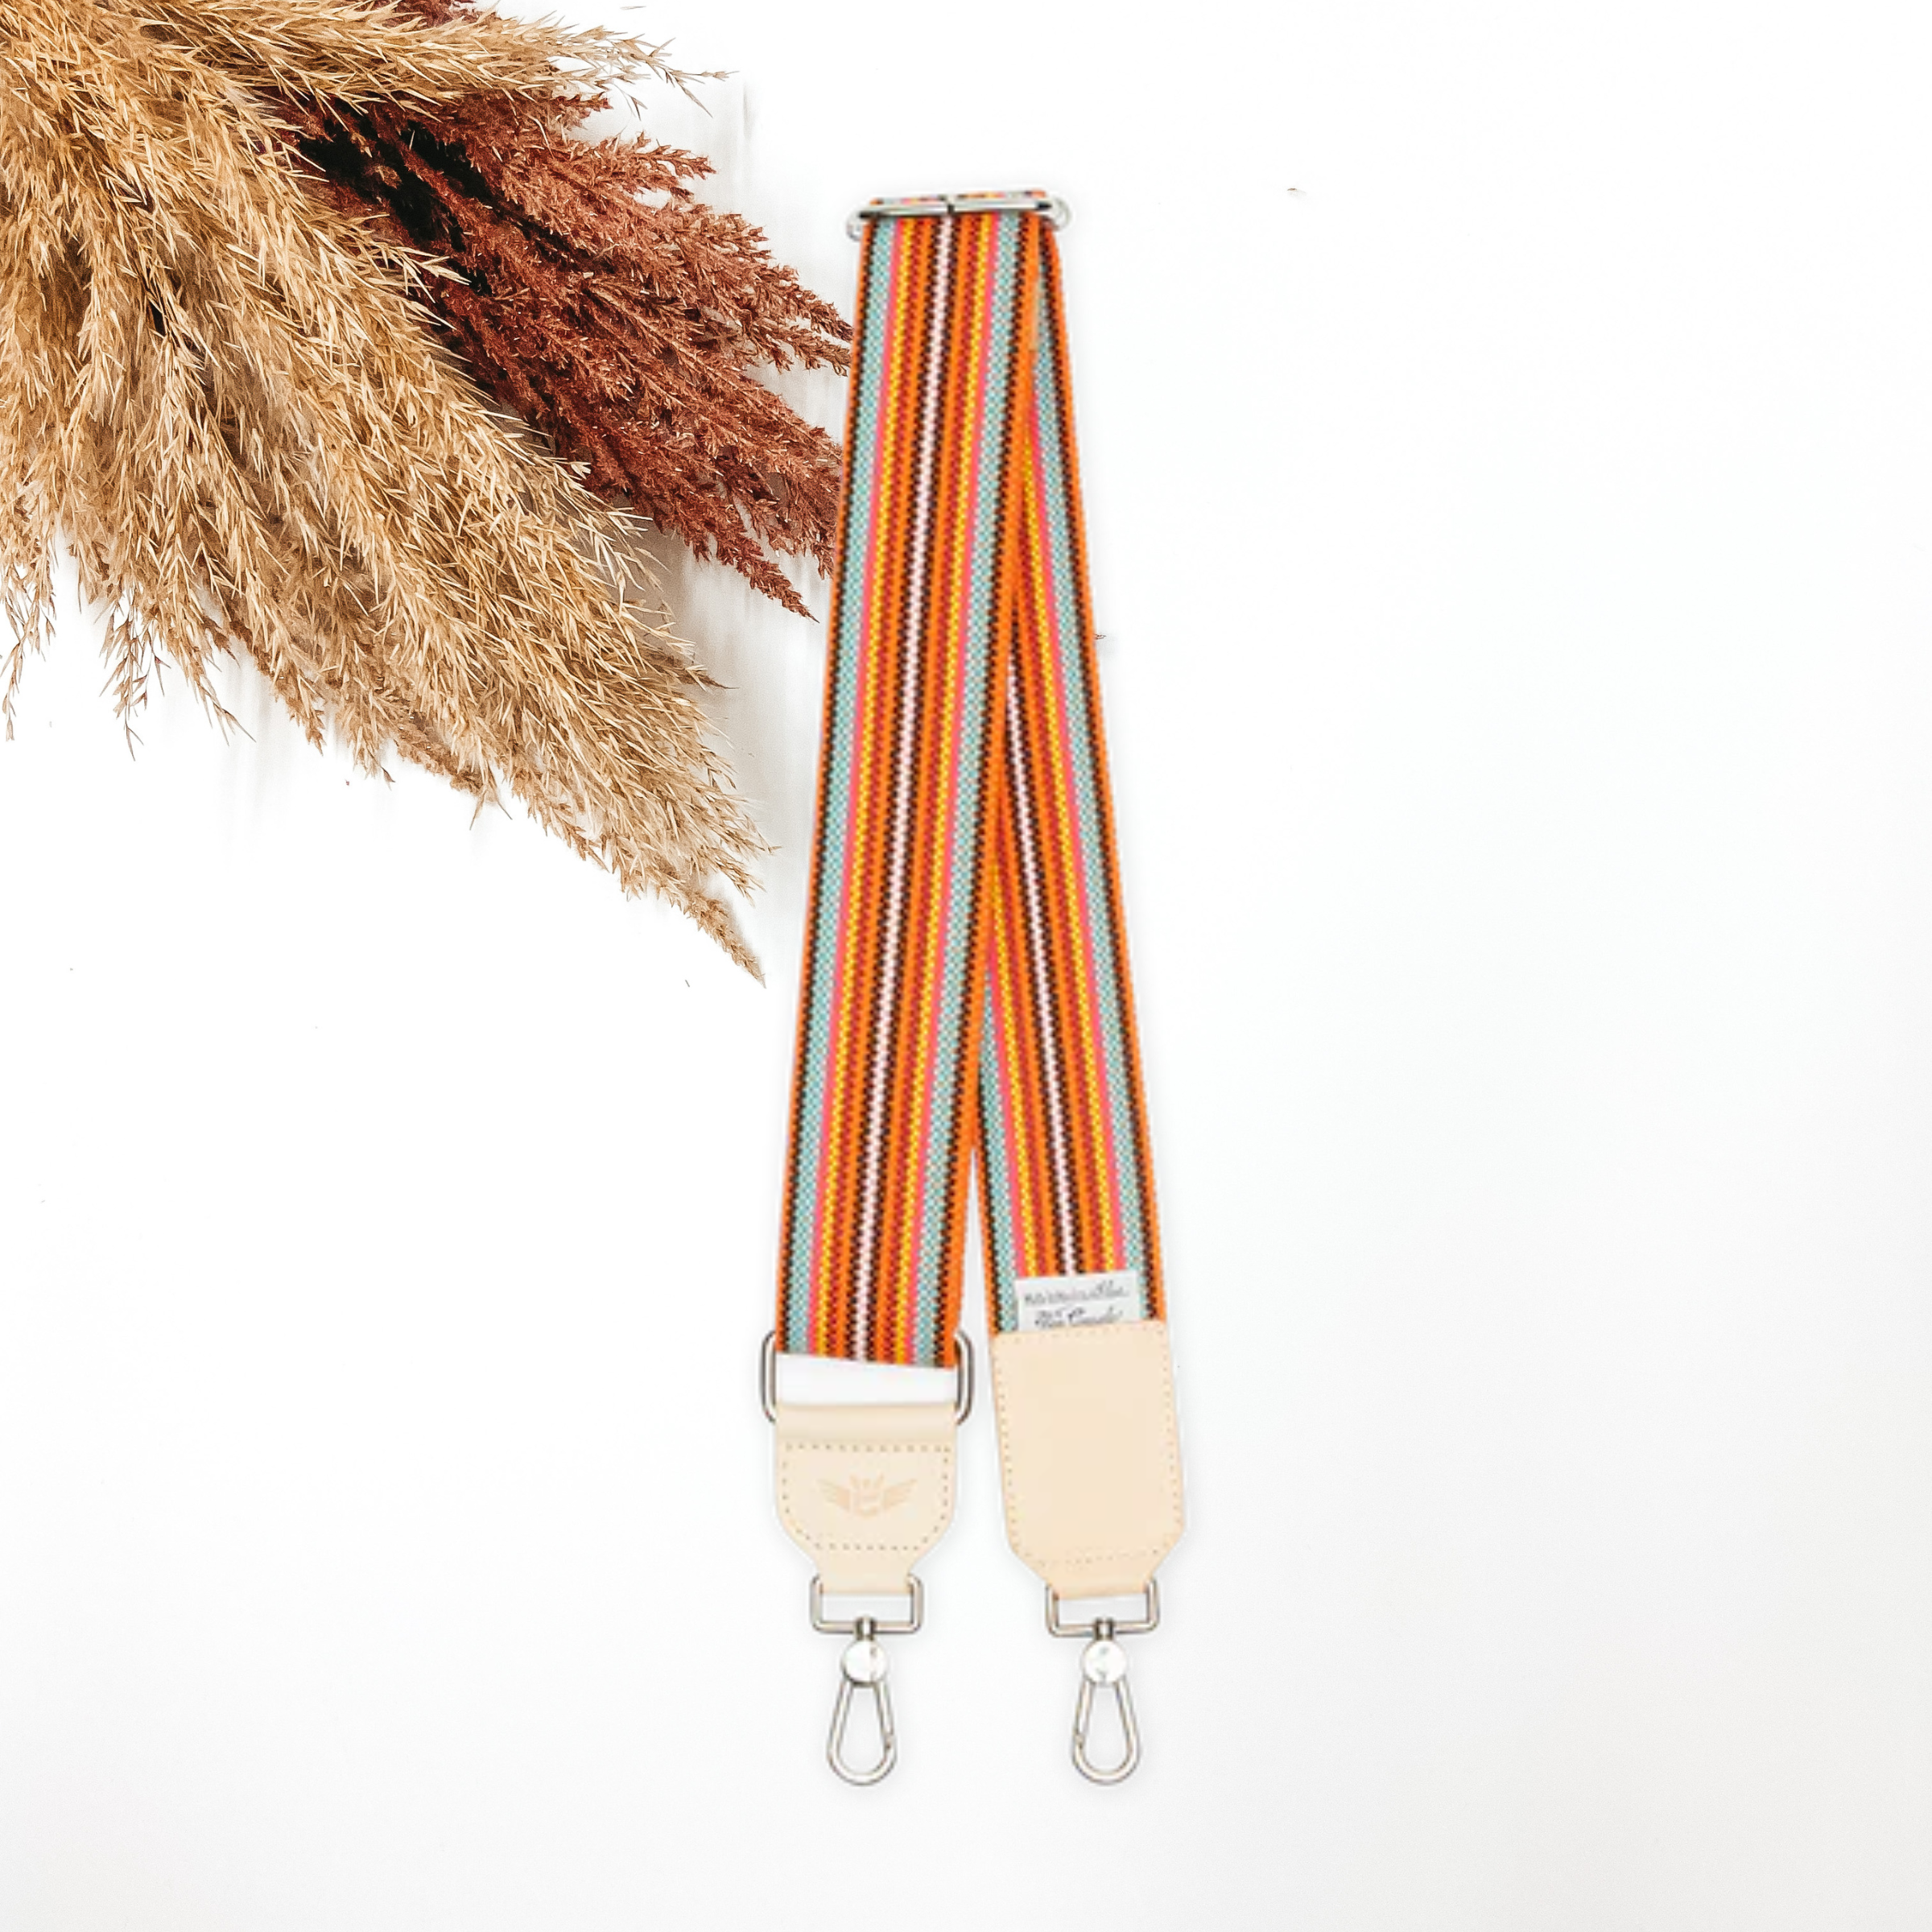 A woven multicolored striped purse strap that has a main color of orange. This purse strap is pictured on a white background with tan and brown pompous grass in the top left corner.